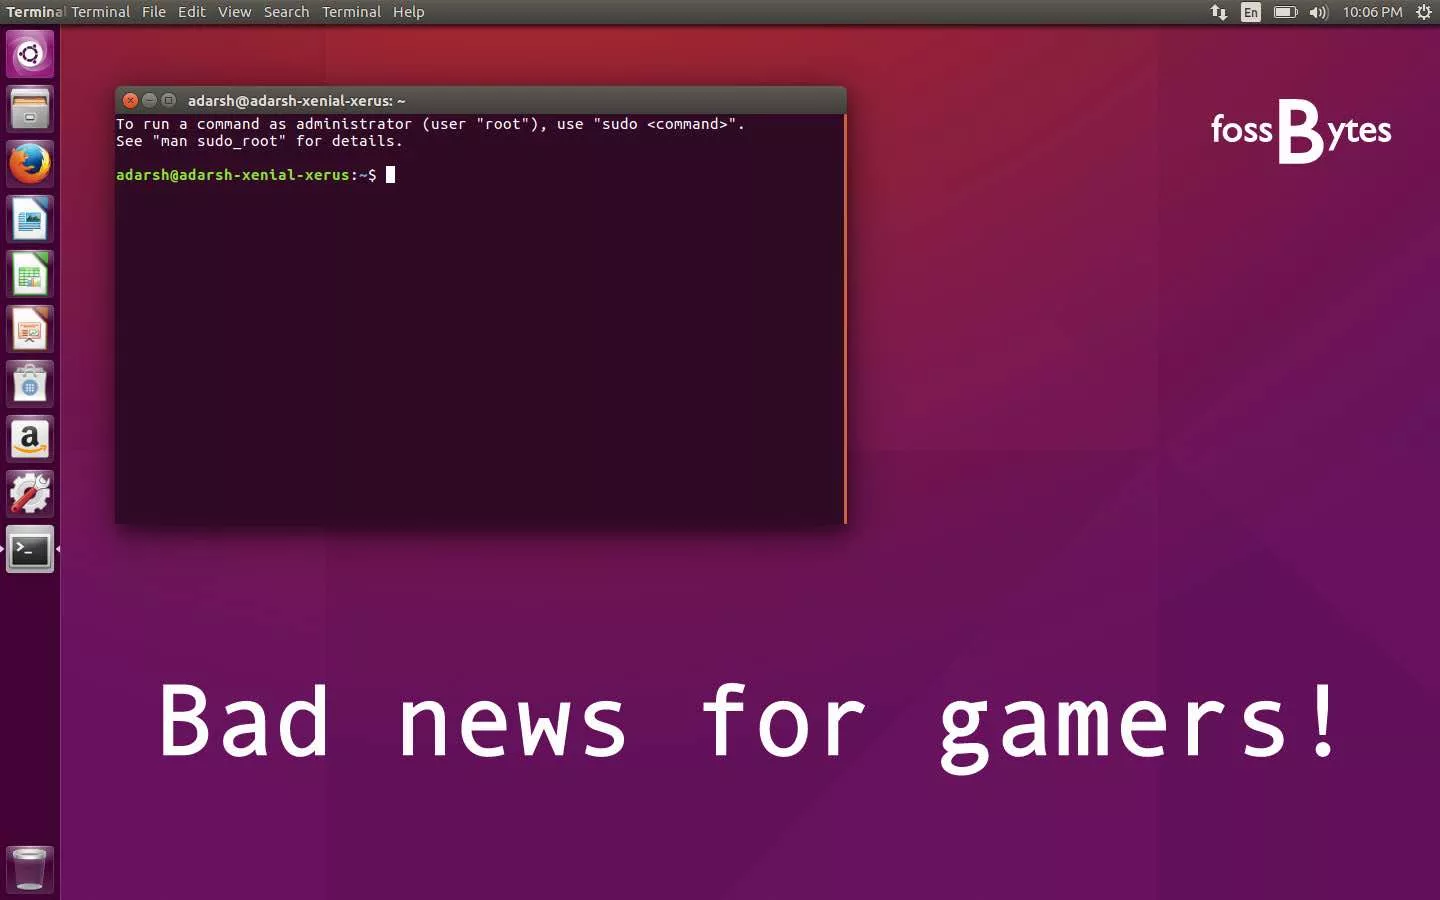 Linux Gamers With AMD GPUs May Want To Avoid Ubuntu 16.04 LTS.